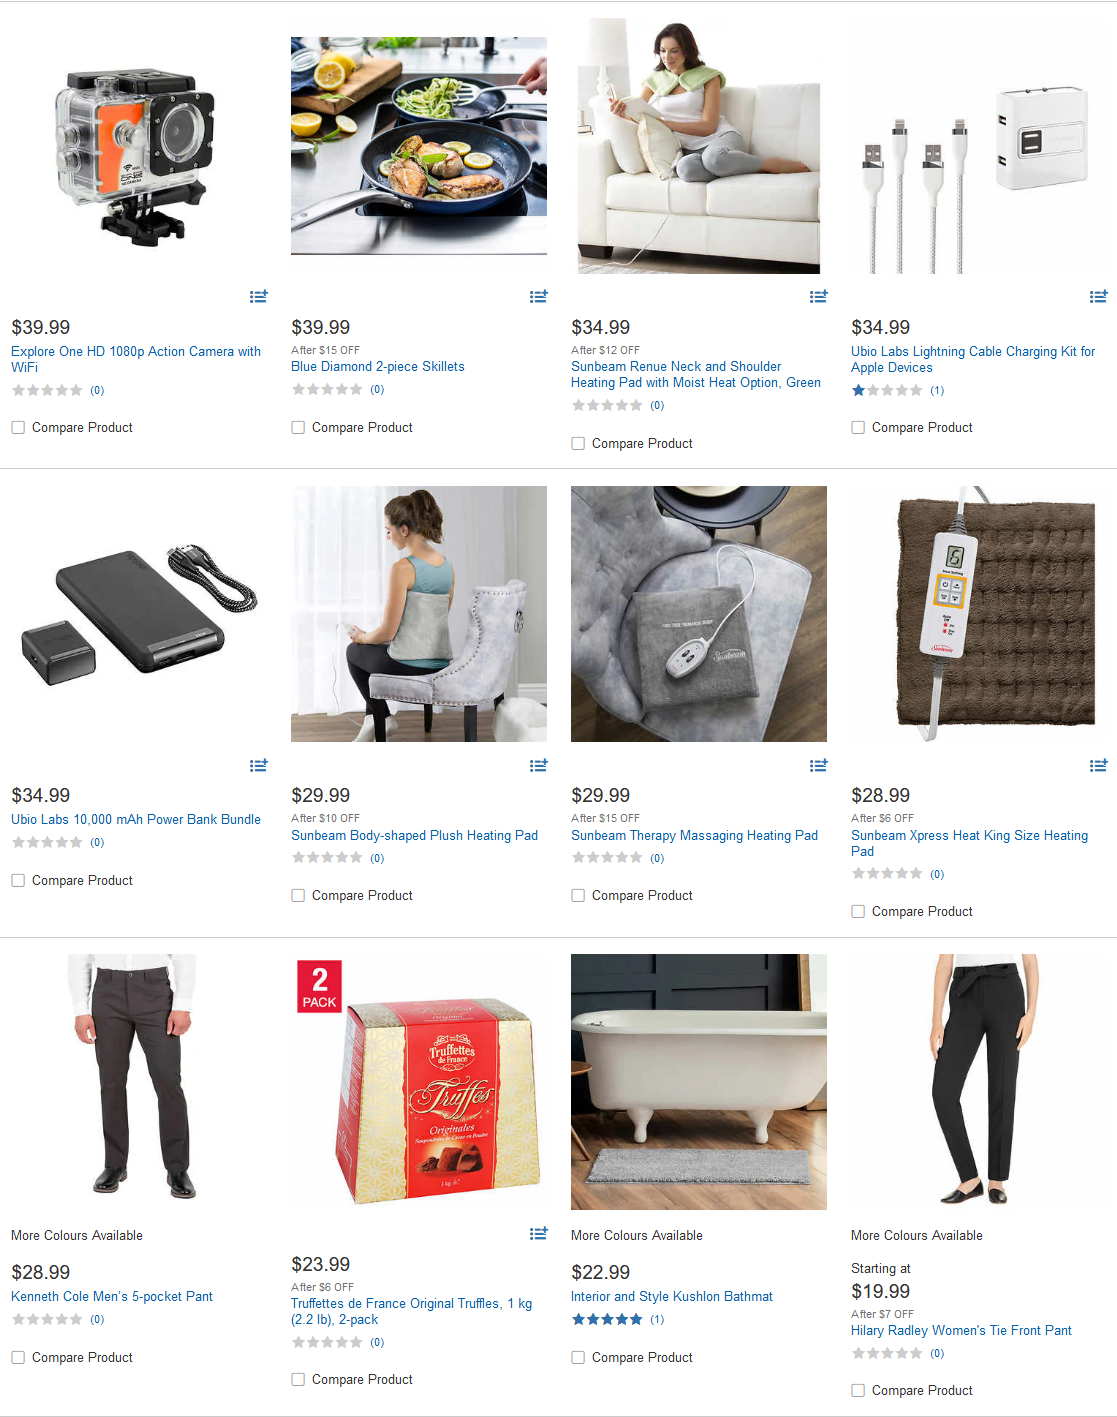 Cyber Monday Event Costco.ca (444 items) & Coupon Stacking Costco